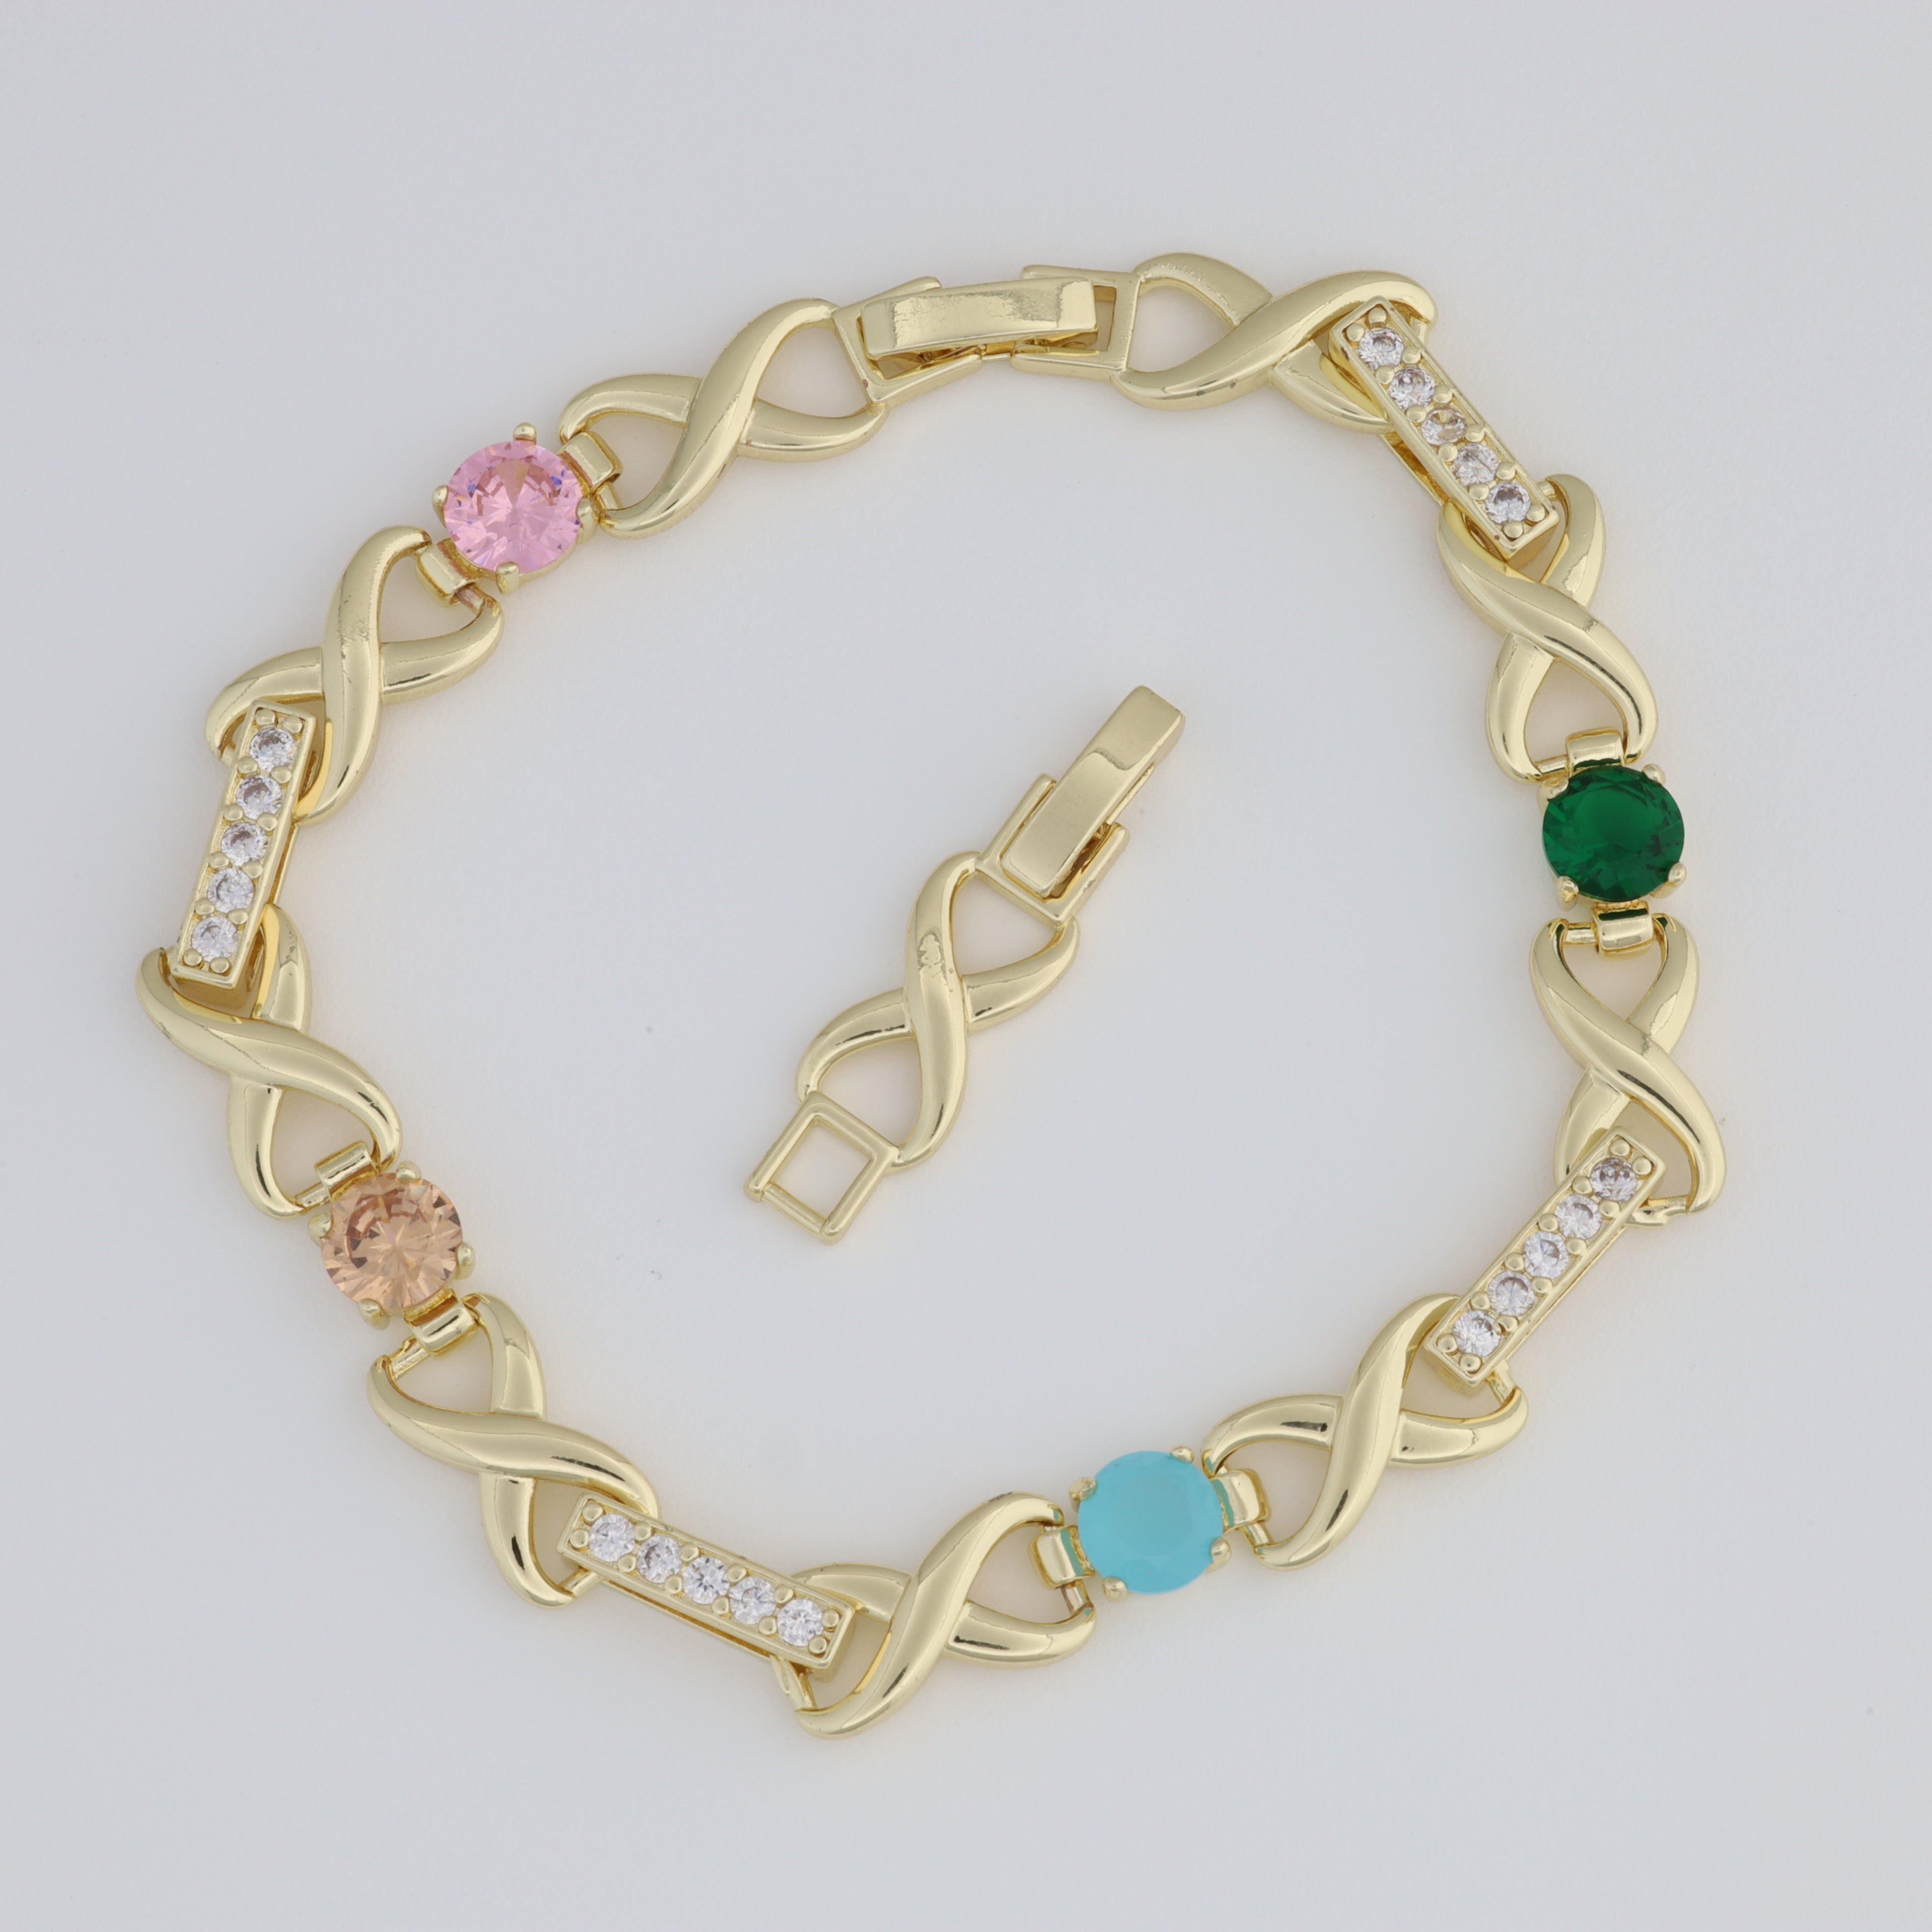 Colored Bracelet With Infinity Pendant